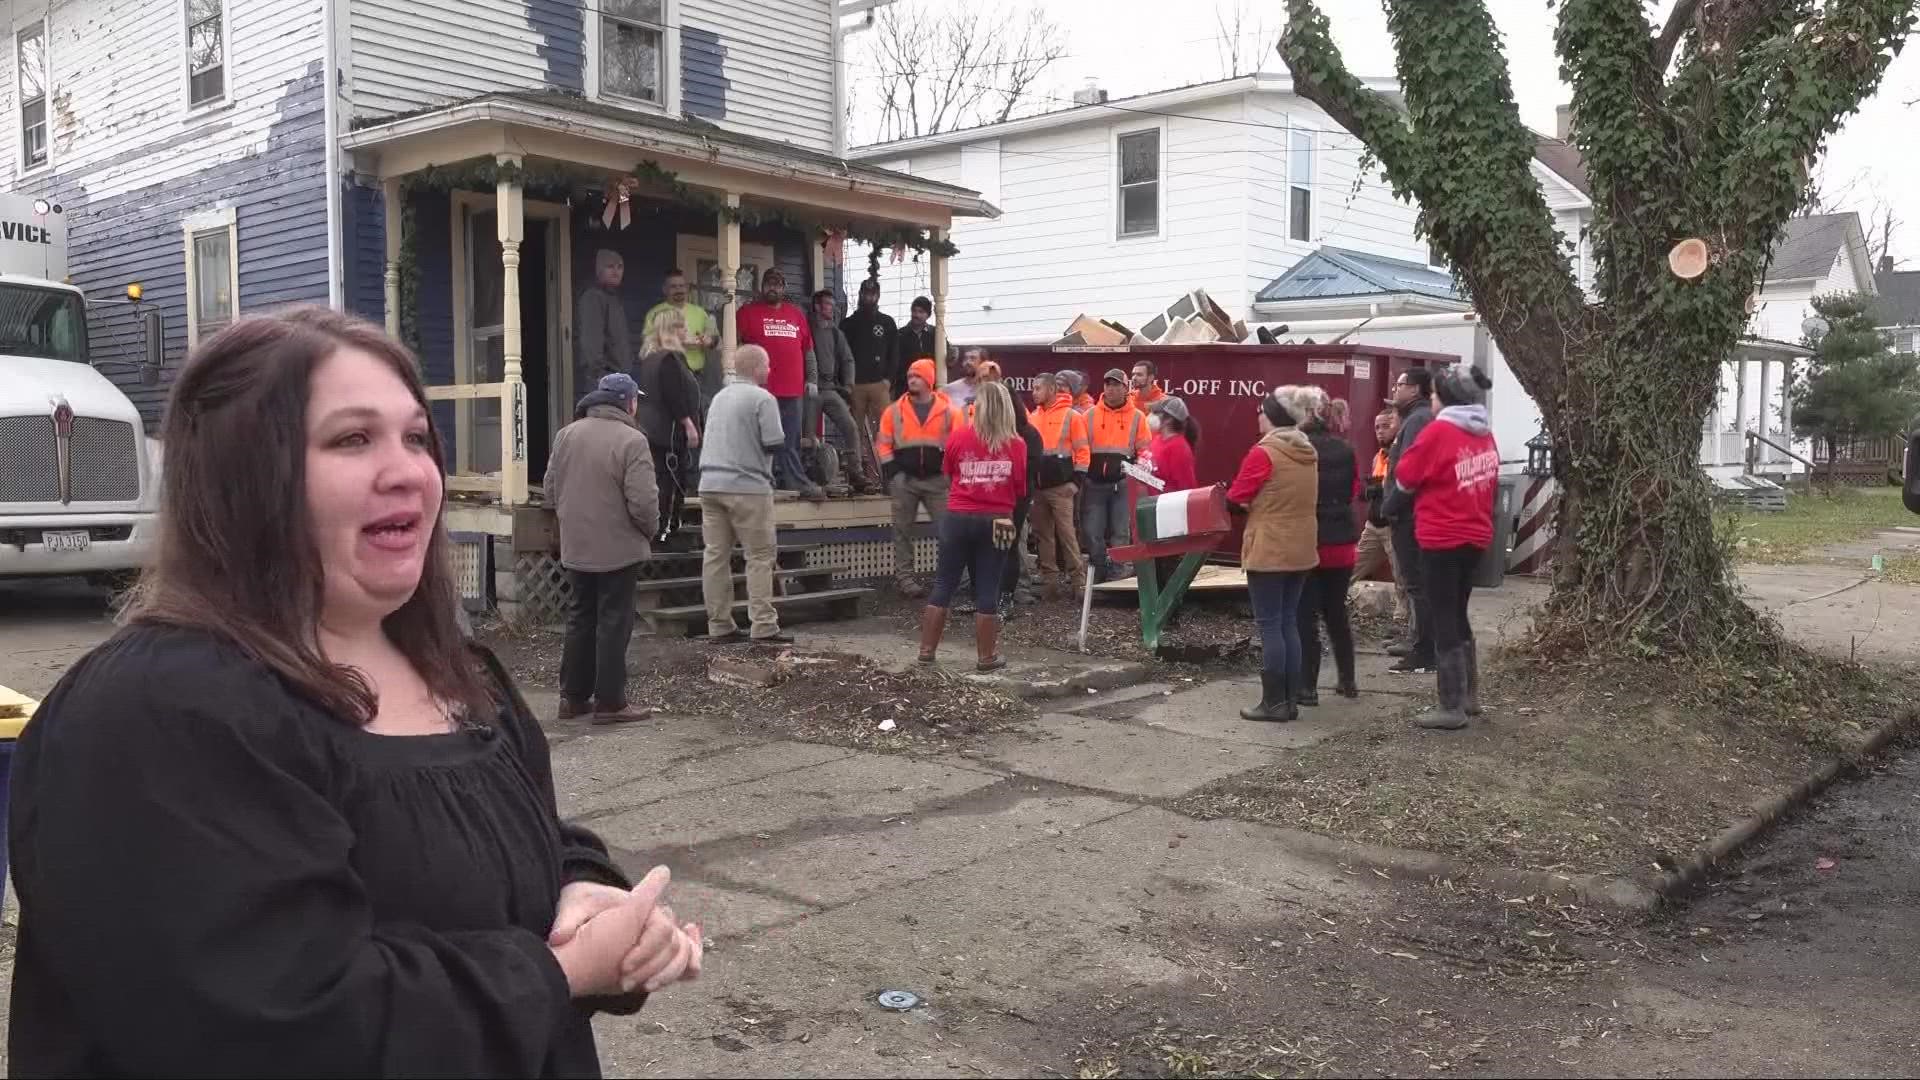 Dozens of volunteers fixed up a man's house after the unexpected loss of his brother. Emma Henderson brings you the story of this holiday gift.